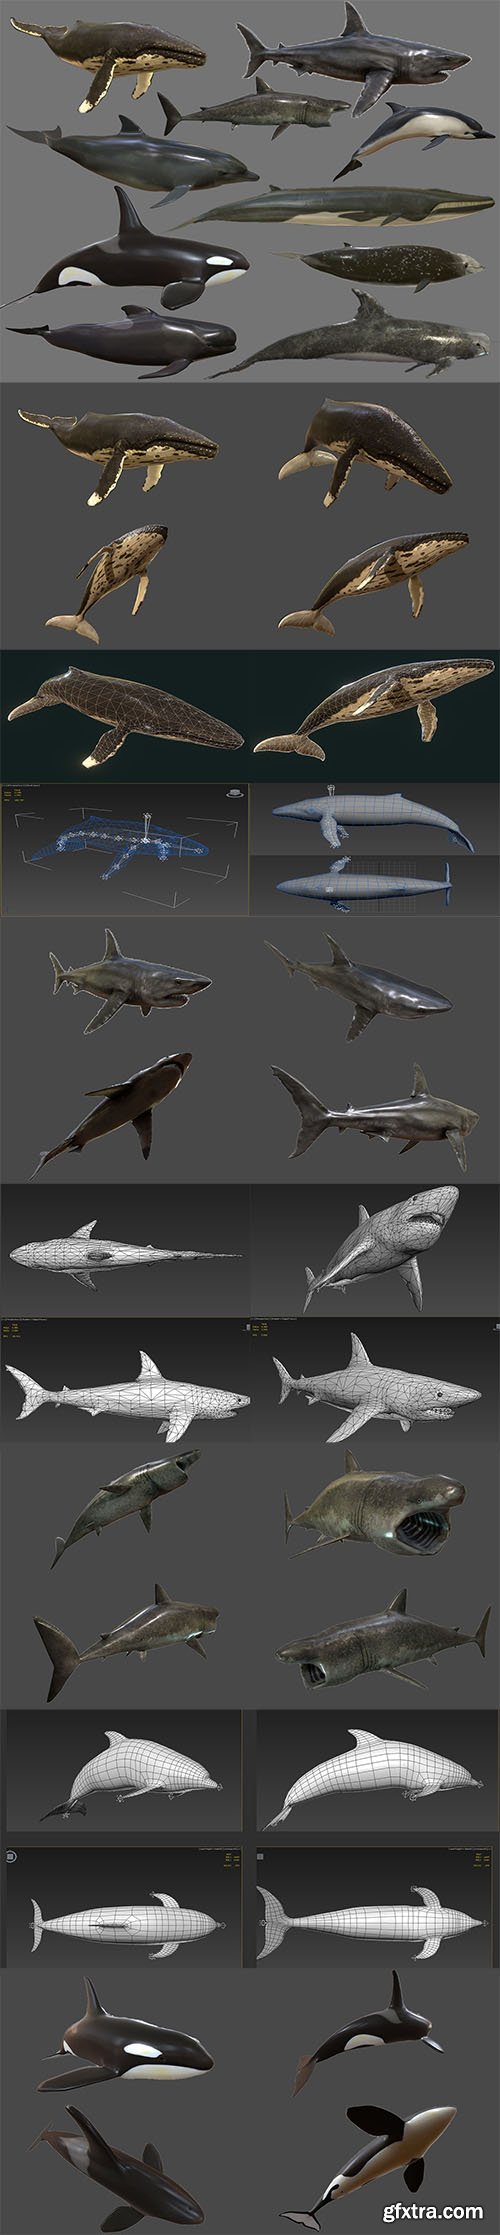 Cgtrader - Big Fish Collection Low poly - Animated Low-poly 3D model